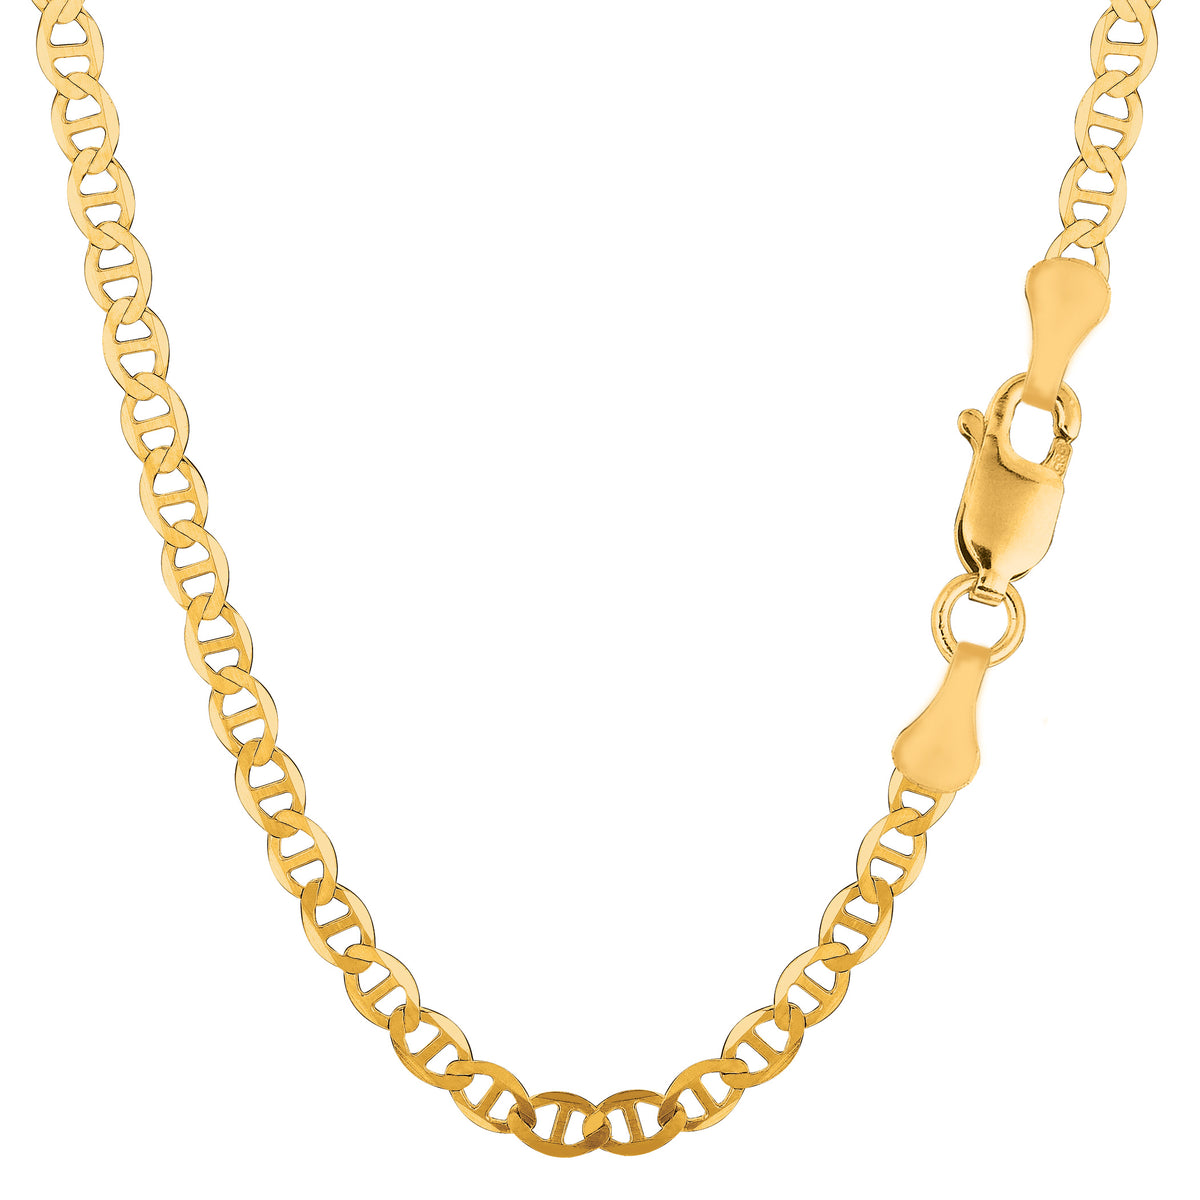 14K Yellow Gold Filled Solid Mariner Chain Bracelet, 4.5 mm, 8.5" fine designer jewelry for men and women